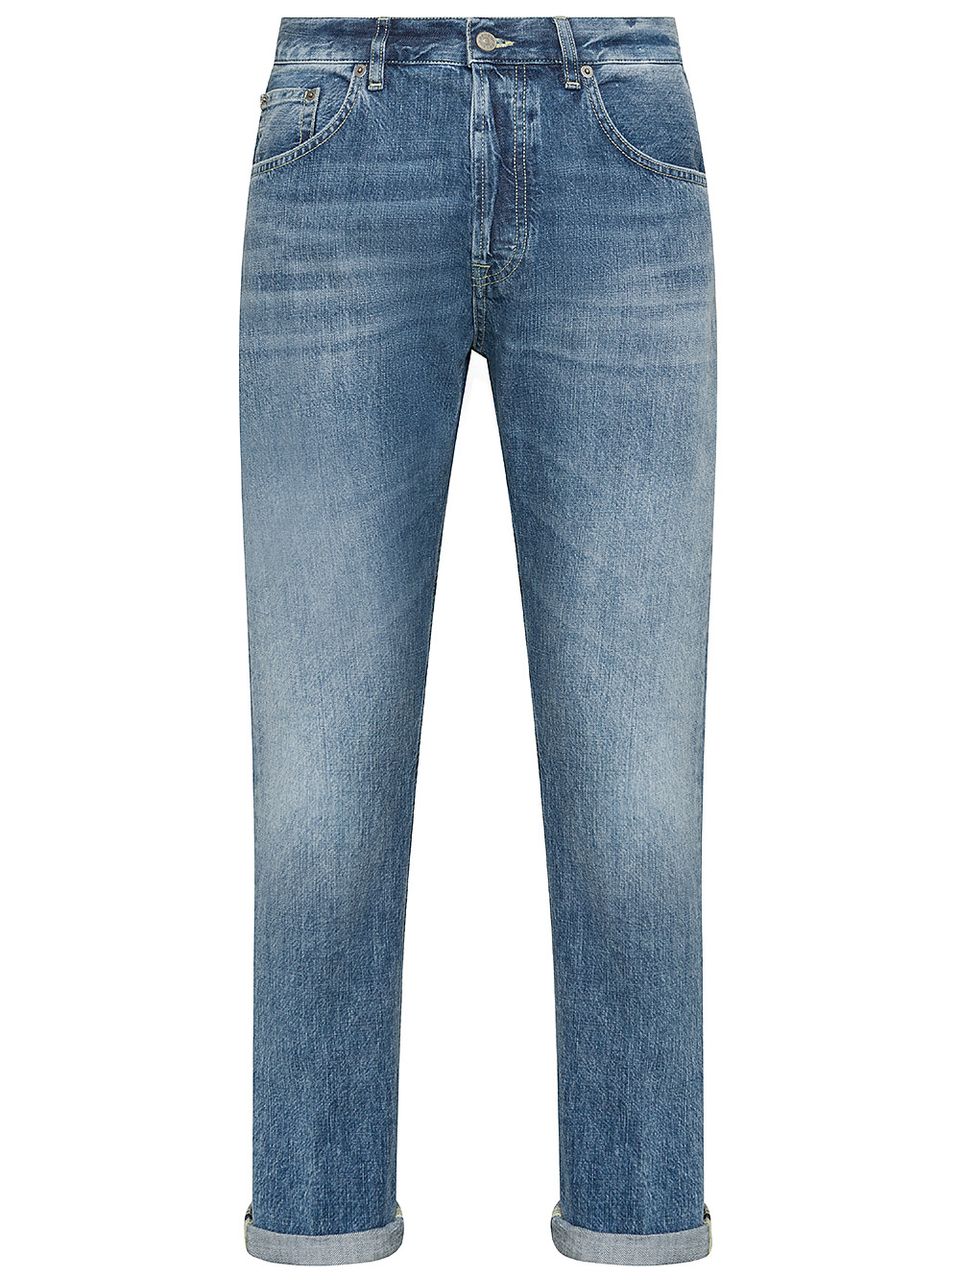 Icon regular fit cotton jeans